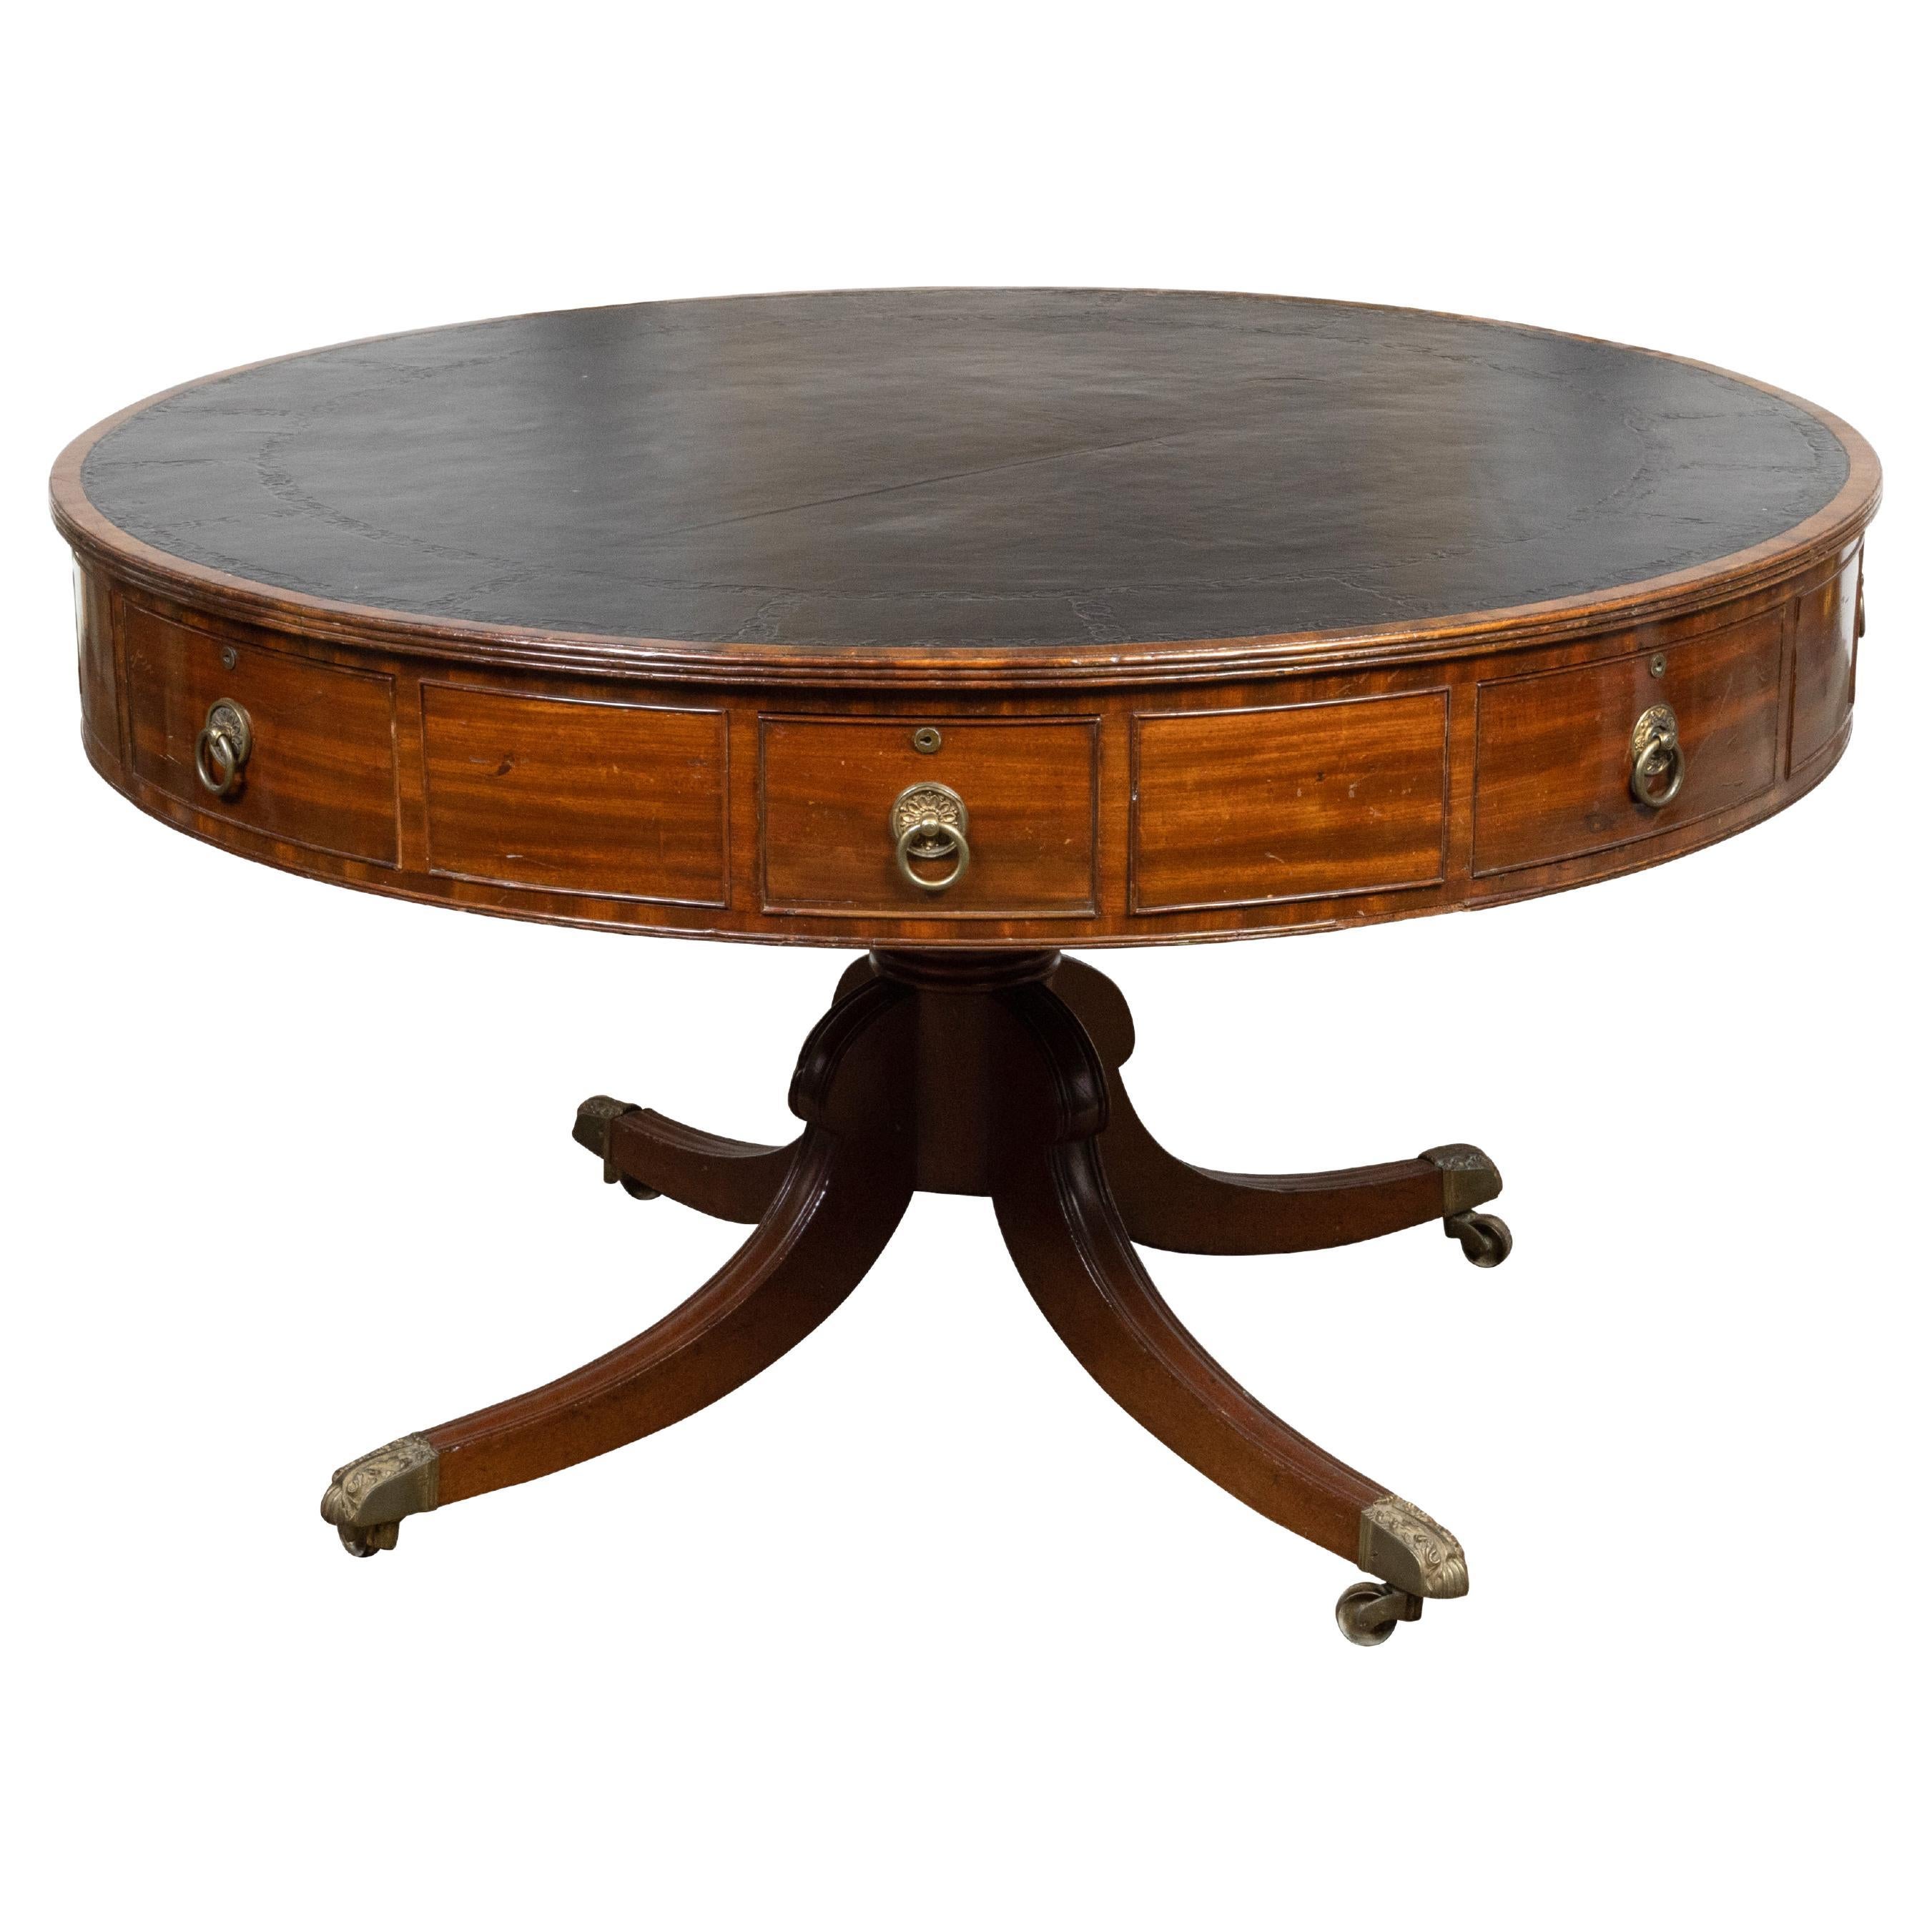 What is an antique rent table?